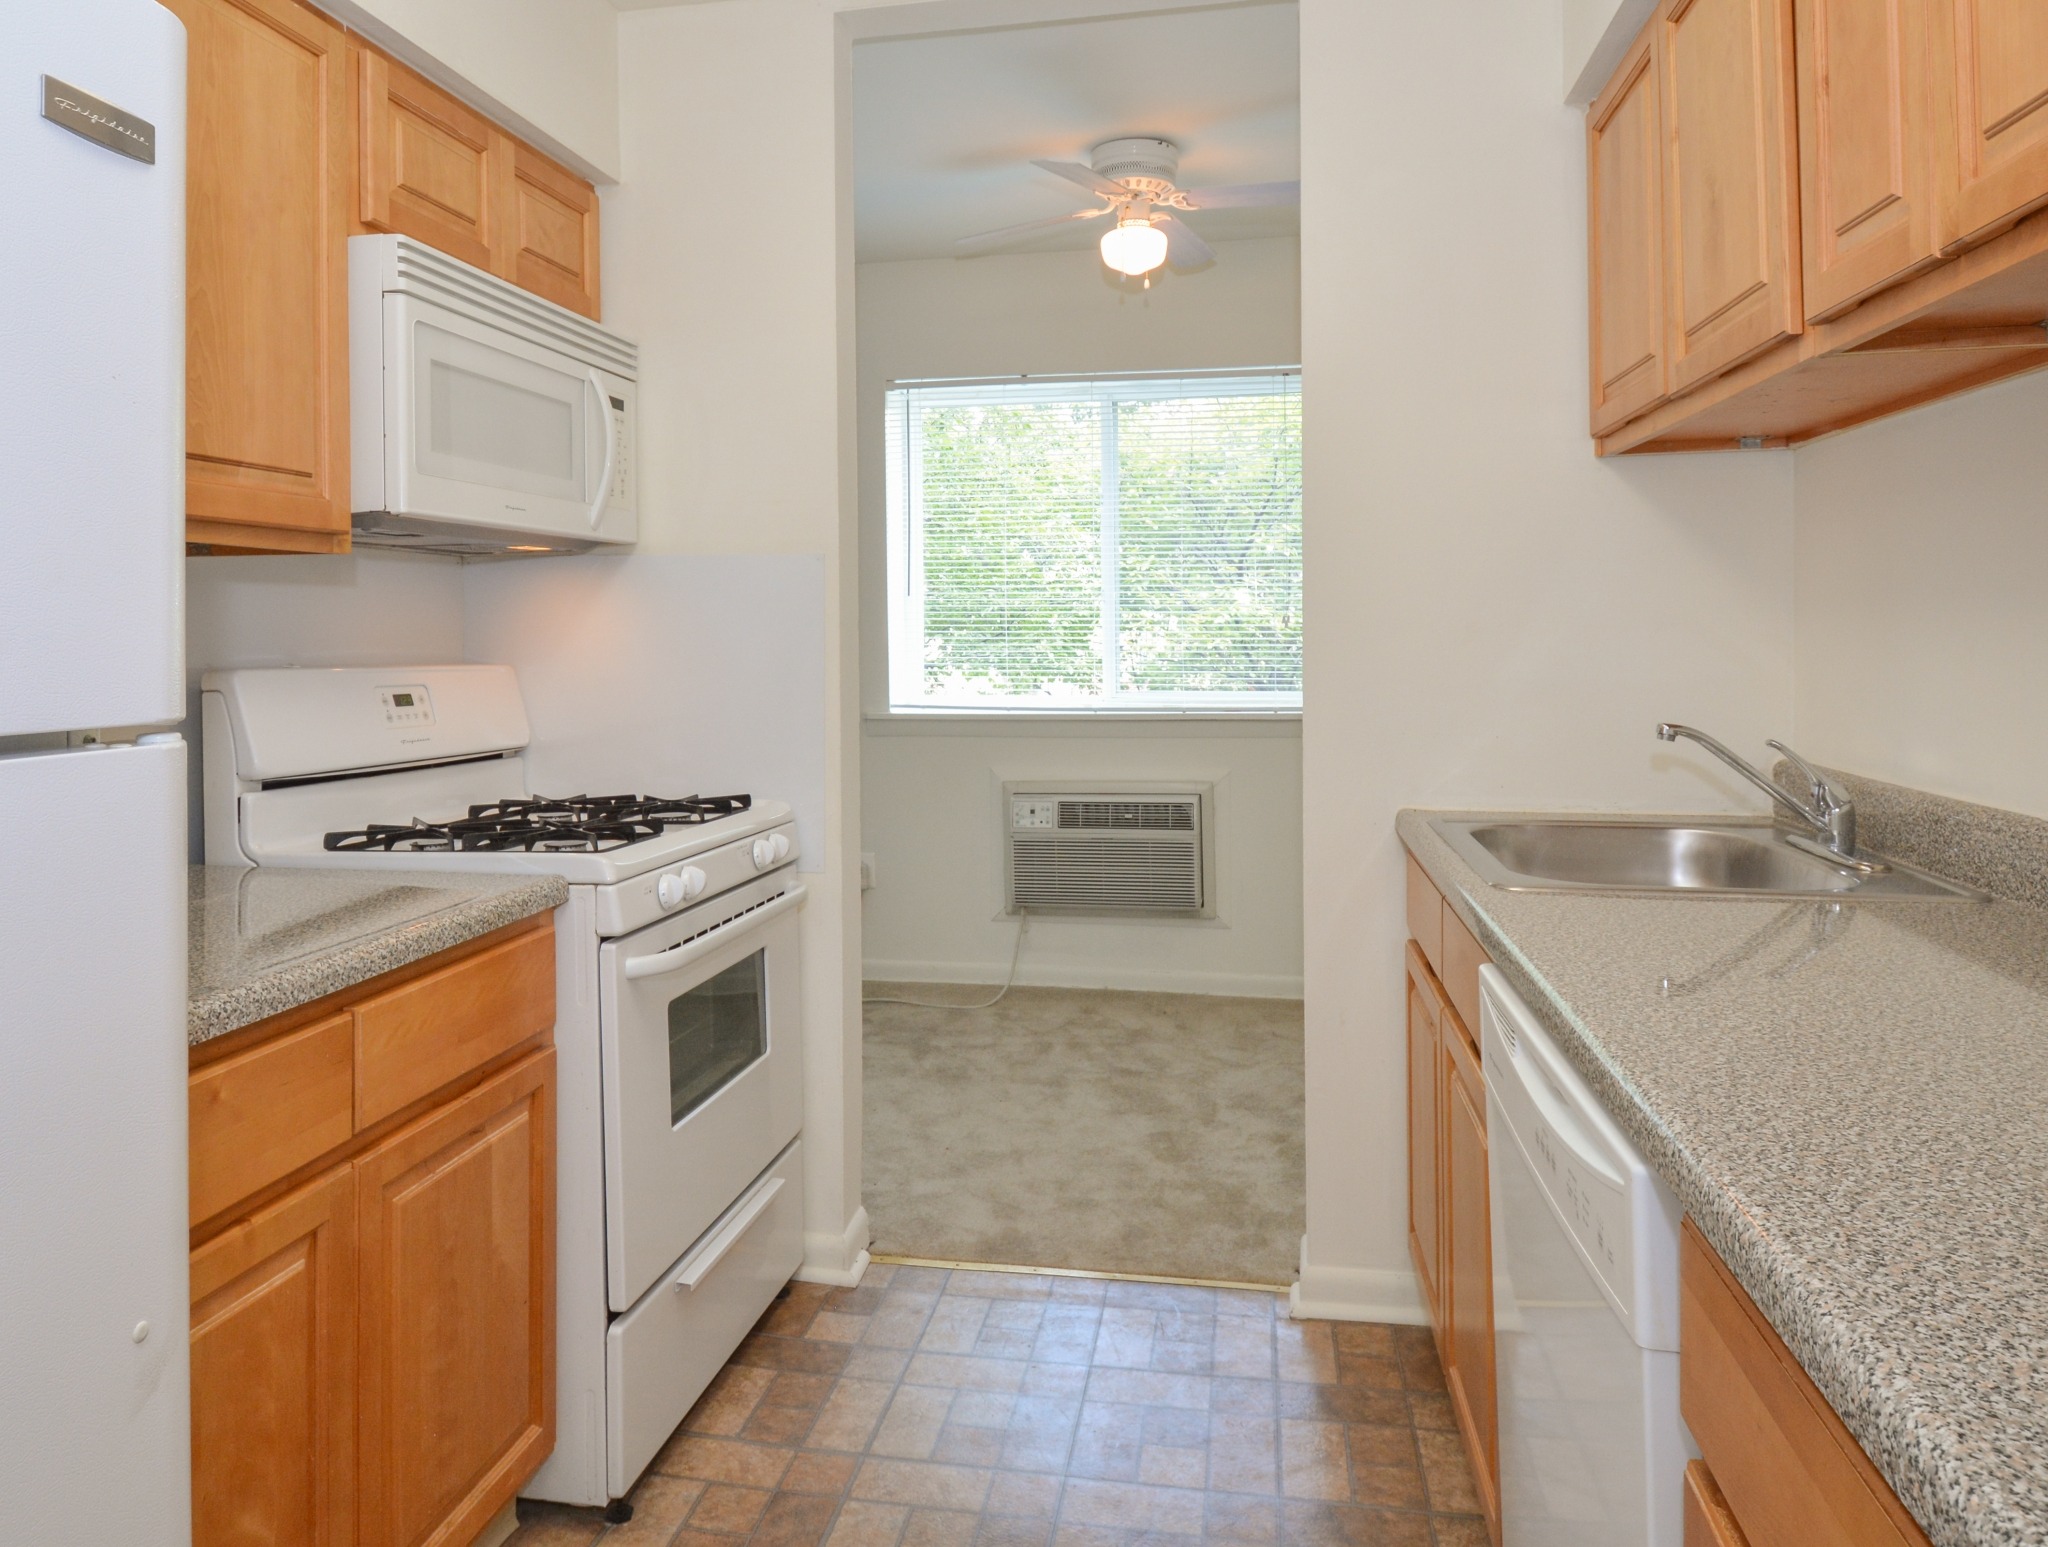 Kitchen area of an apartment, fitted with tiled flooring, spacious cabinets, a stove, a microwave, and a sink